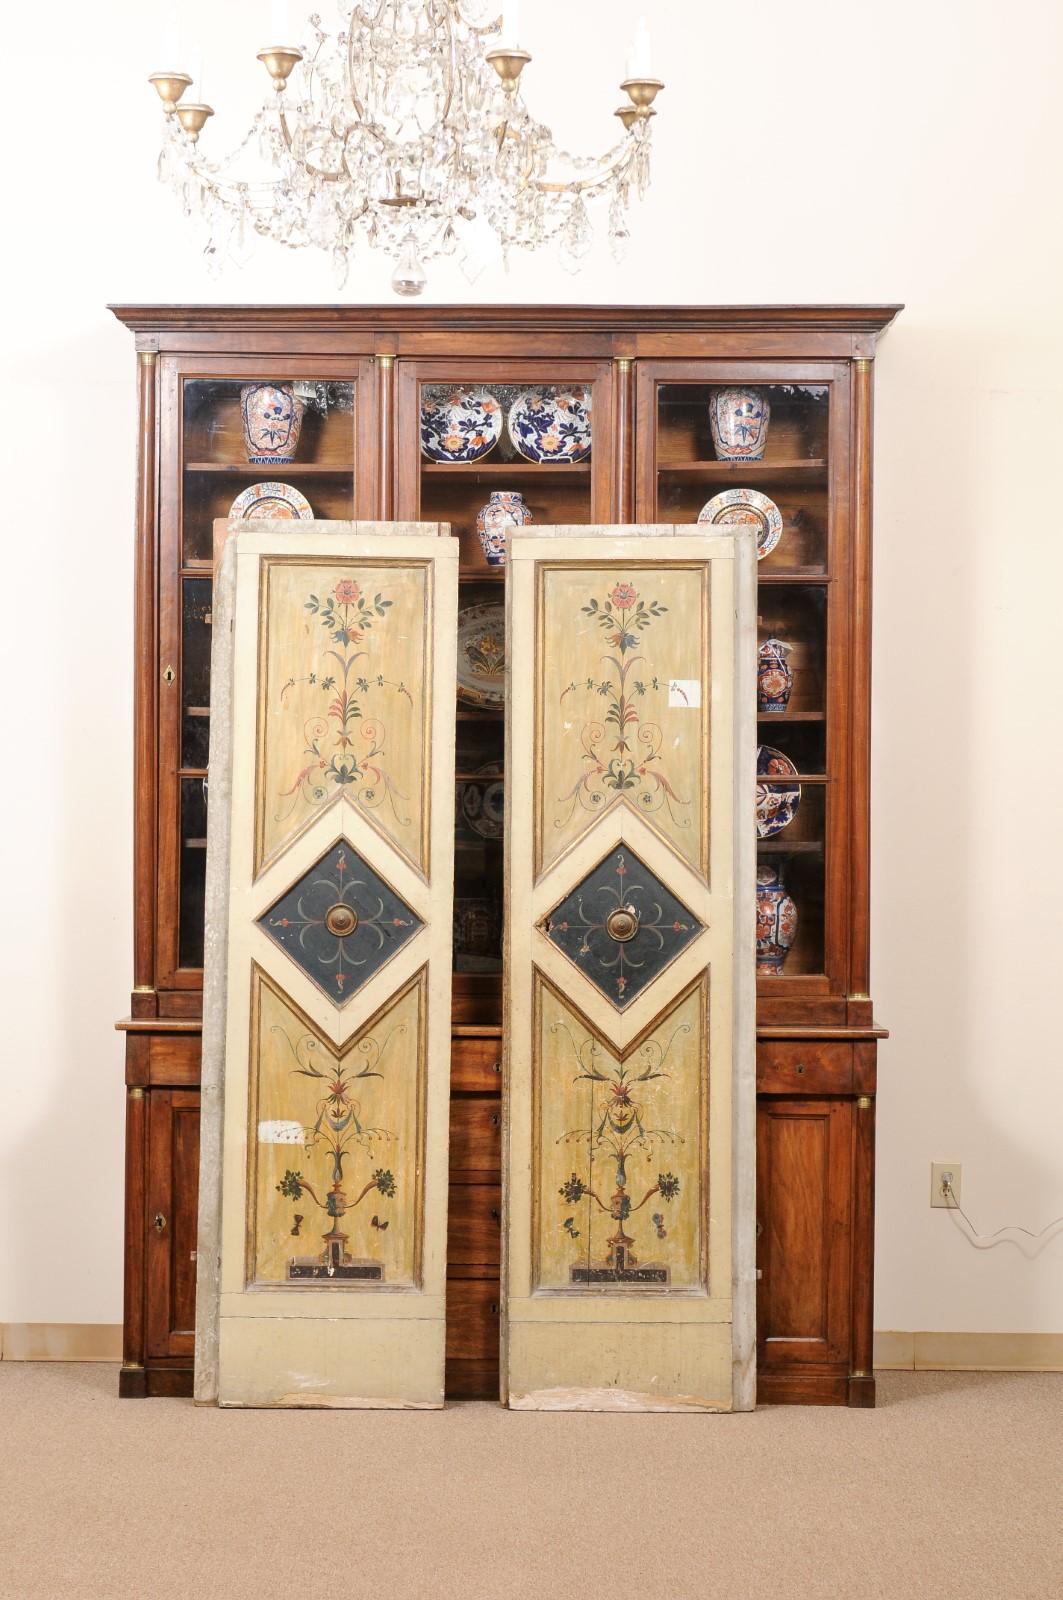 Early 19th Century Pair of Neoclassical Painted Doors with Arabesque Designs, ca. 1800 For Sale